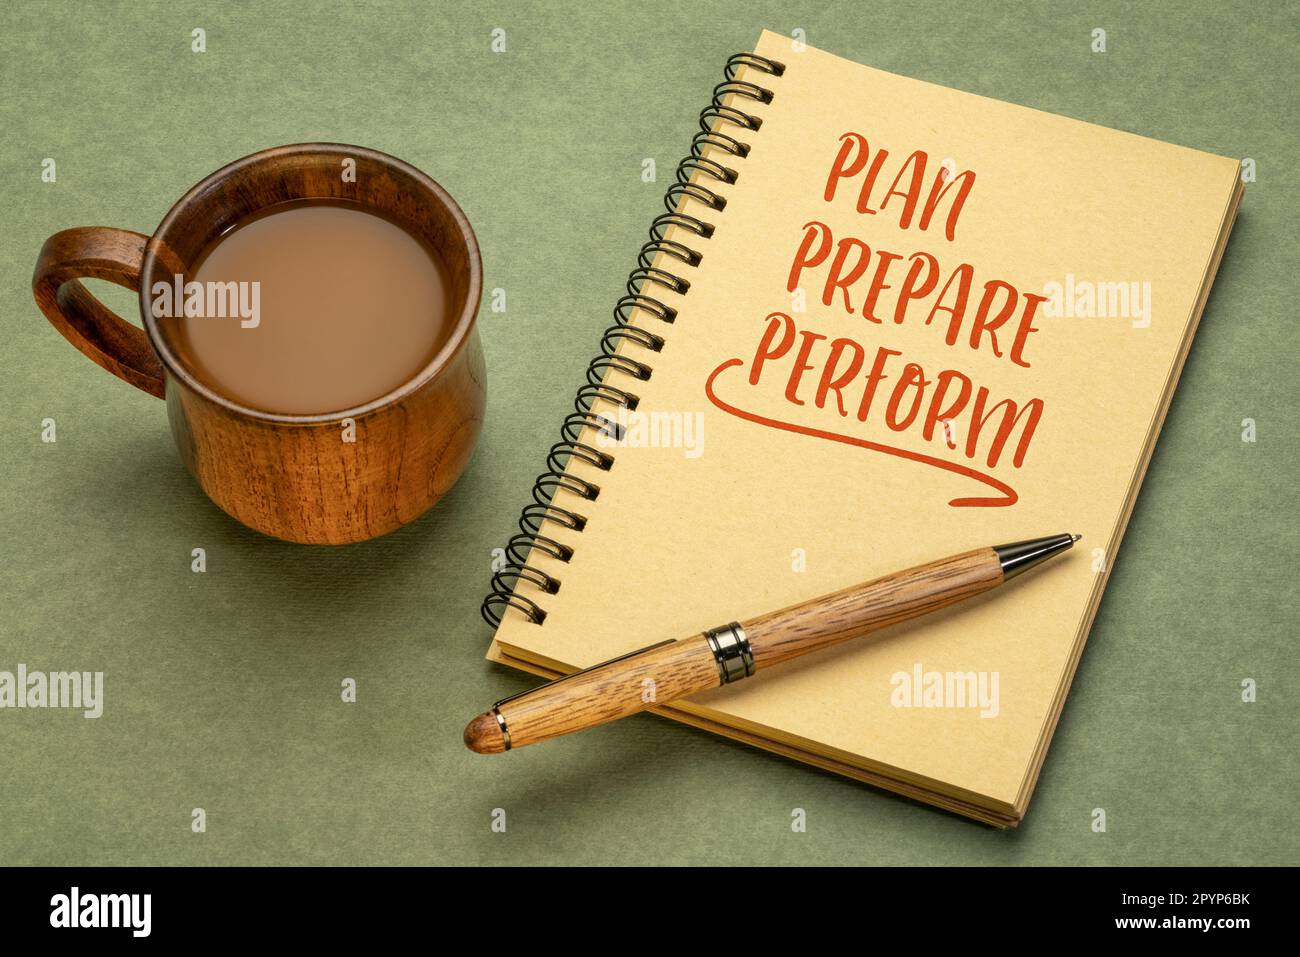 plan, prepare, perform - efficiency and productivity business concept, motivational note in a notebook Stock Photo